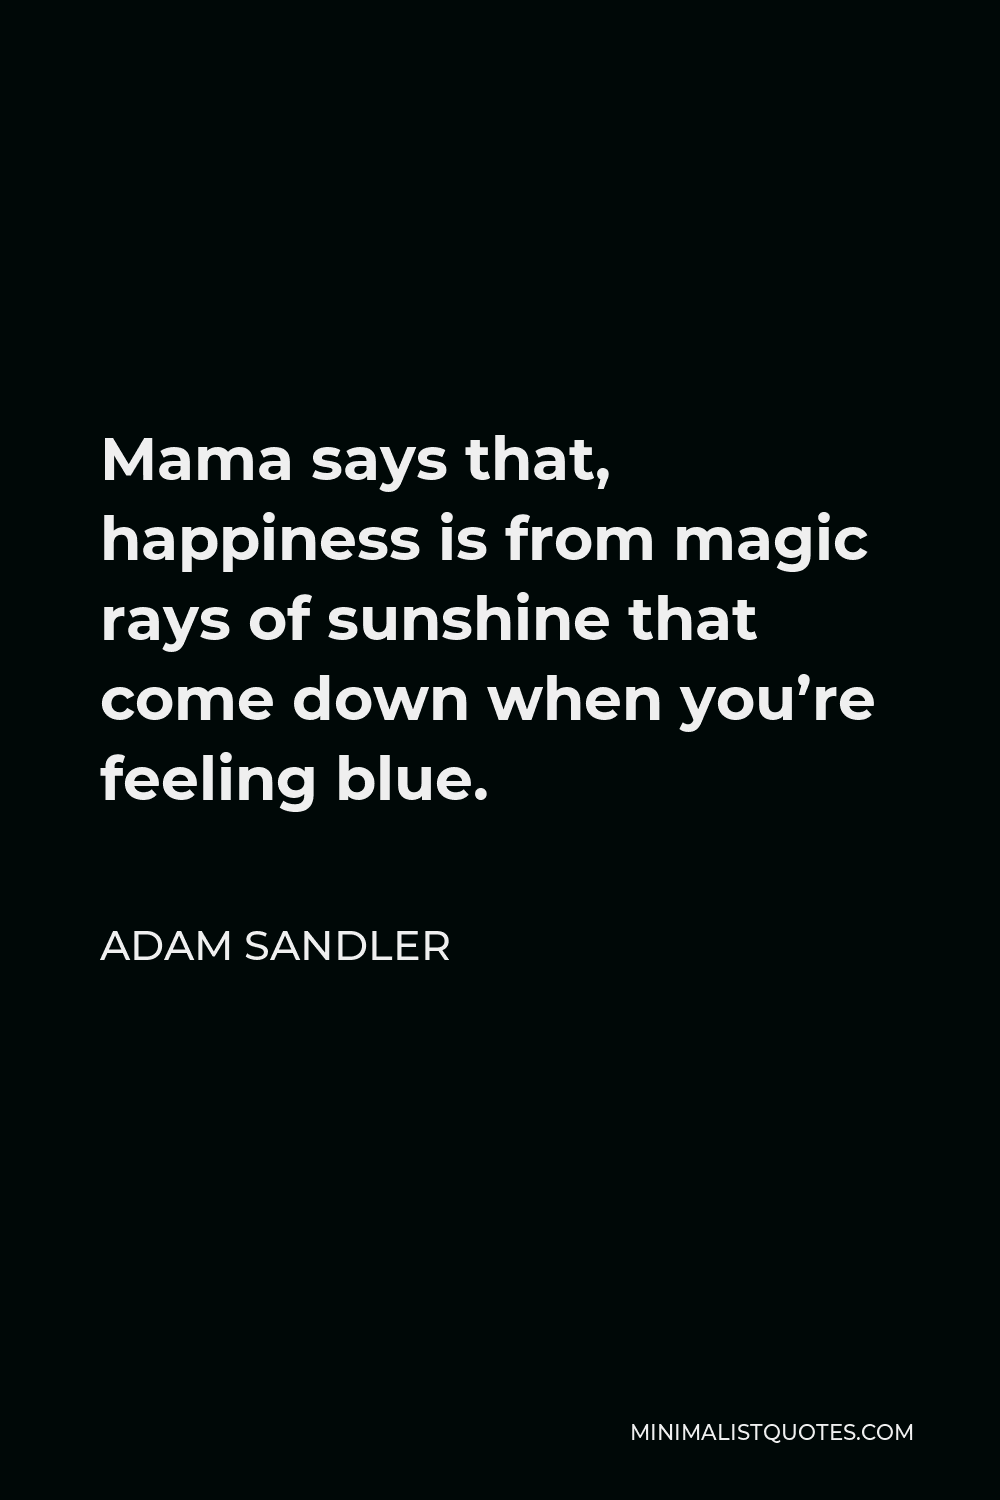 Adam Sandler Quote - Mama says that, happiness is from magic rays of sunshine that come down when you’re feeling blue.